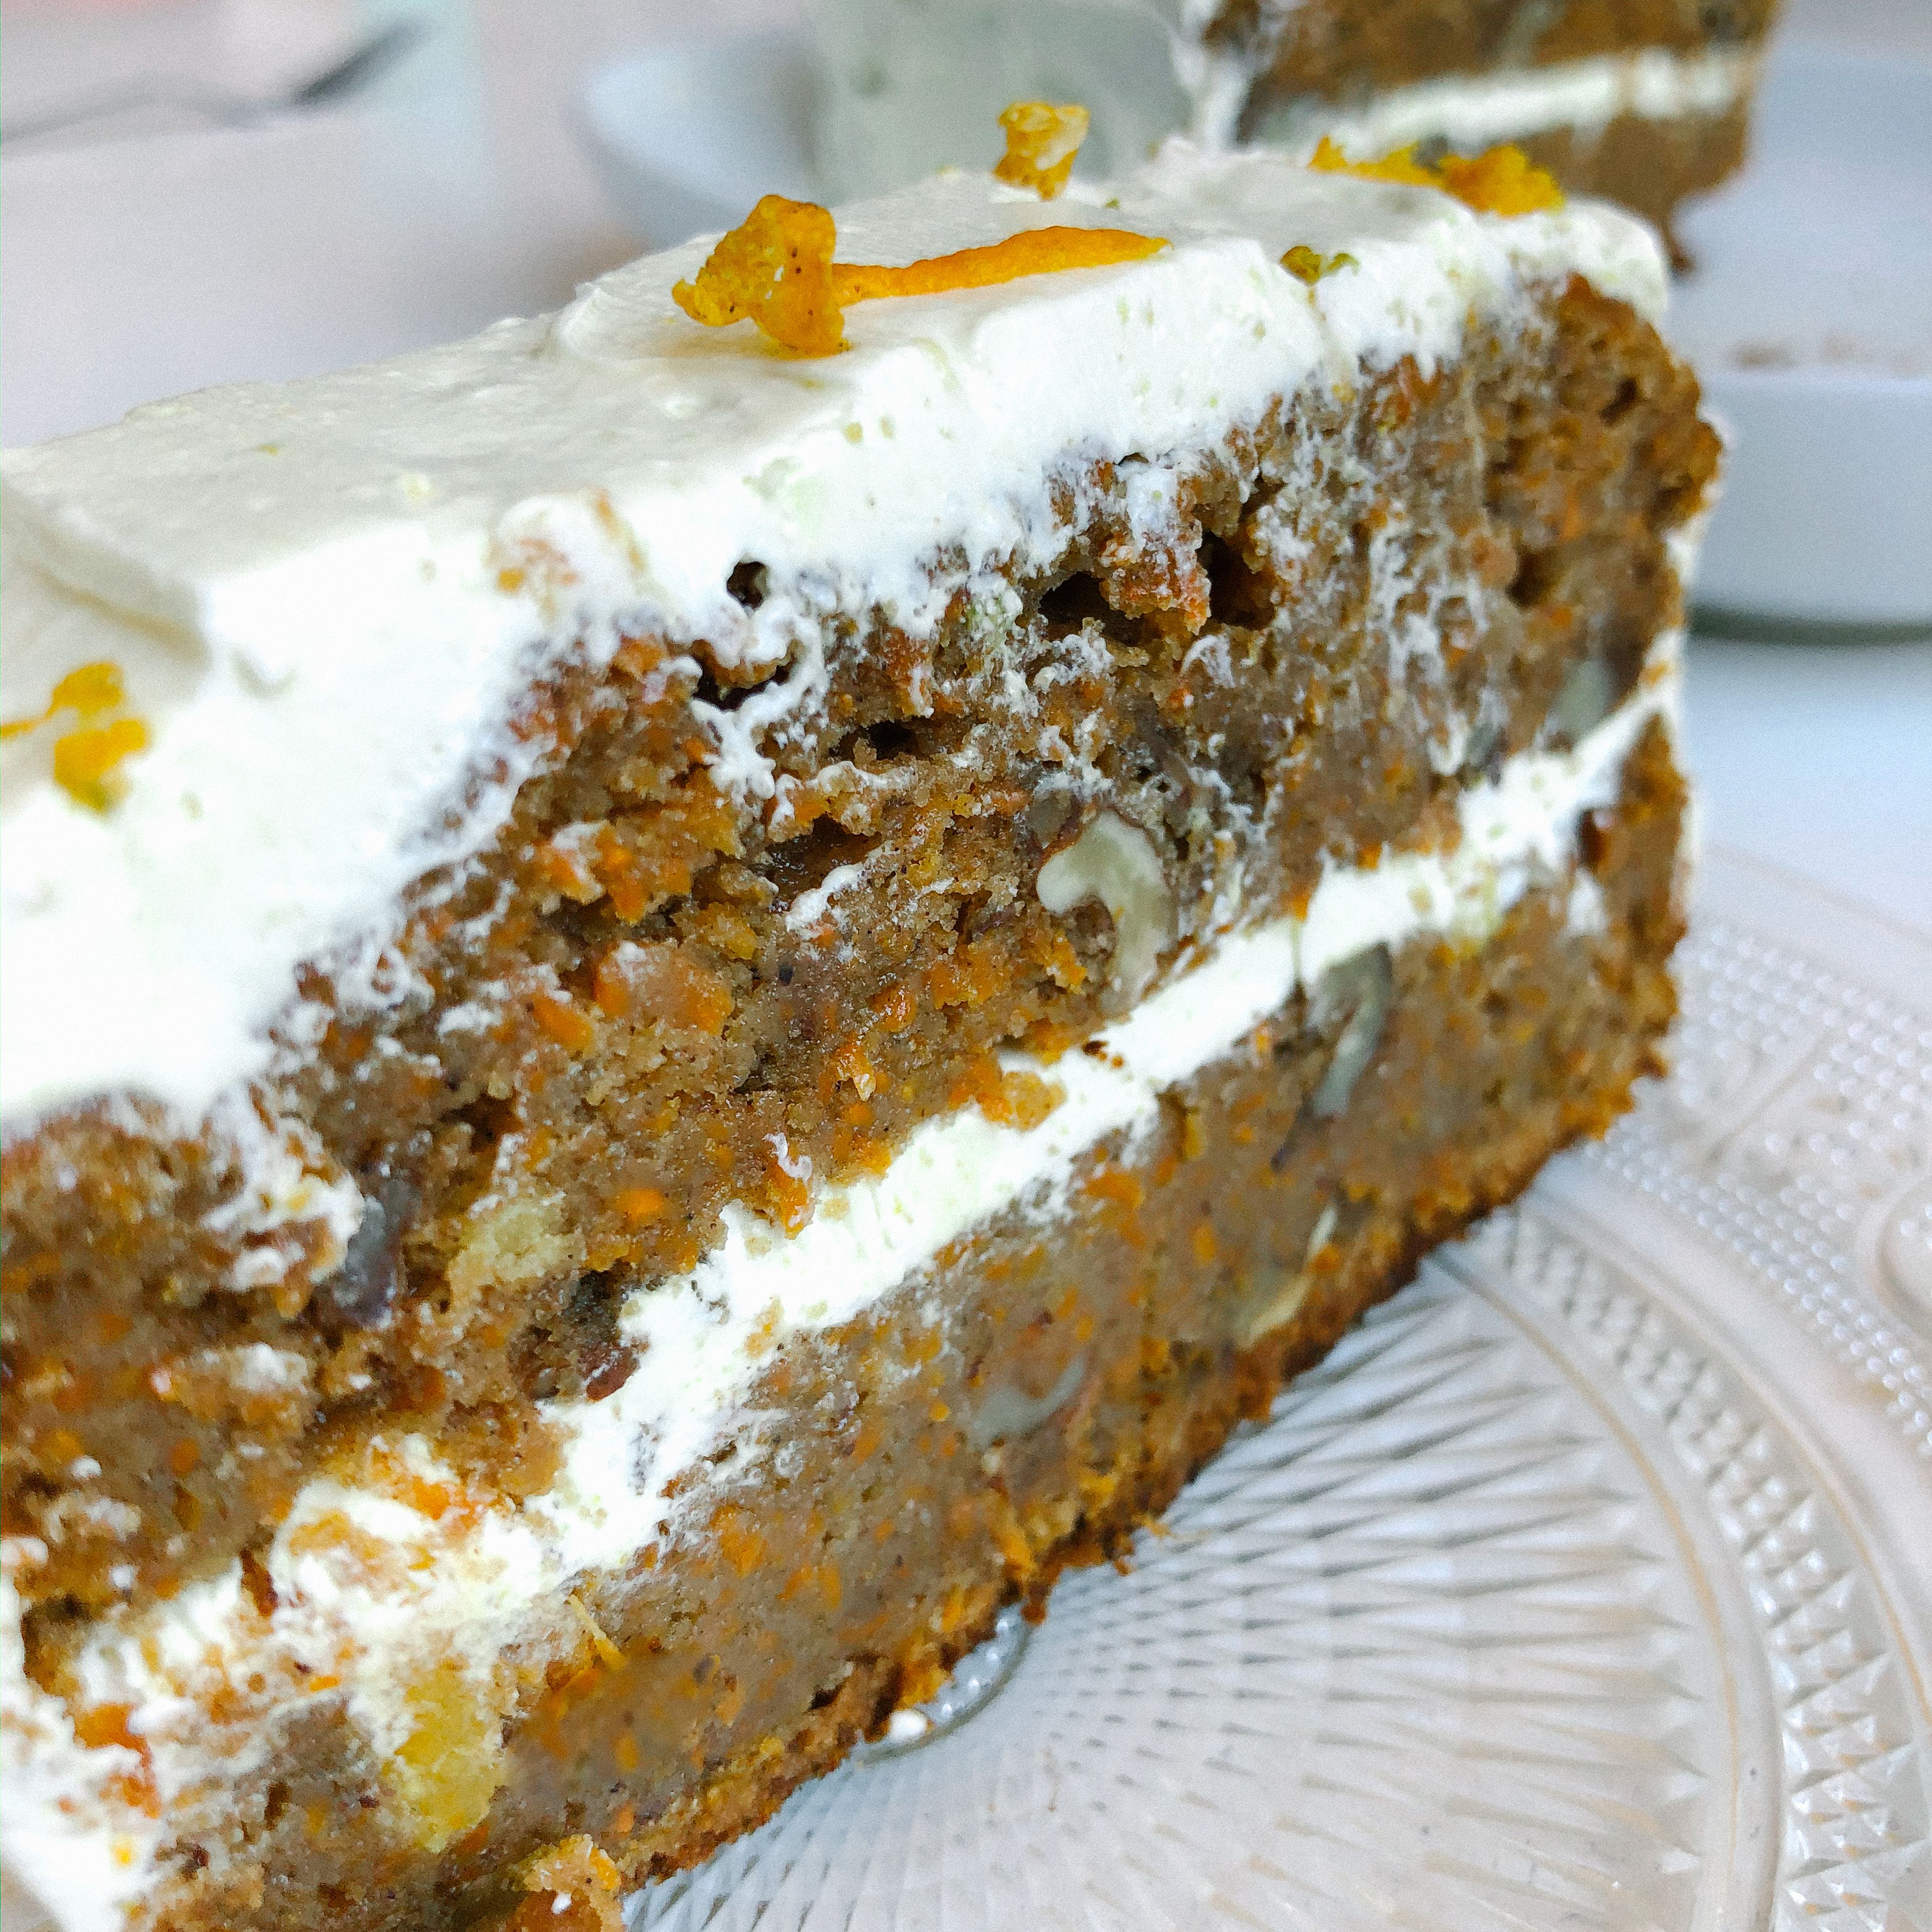 Once the carrot cake is out of the oven and at room temperature, decorate with the frosting and orange or walnut zest.